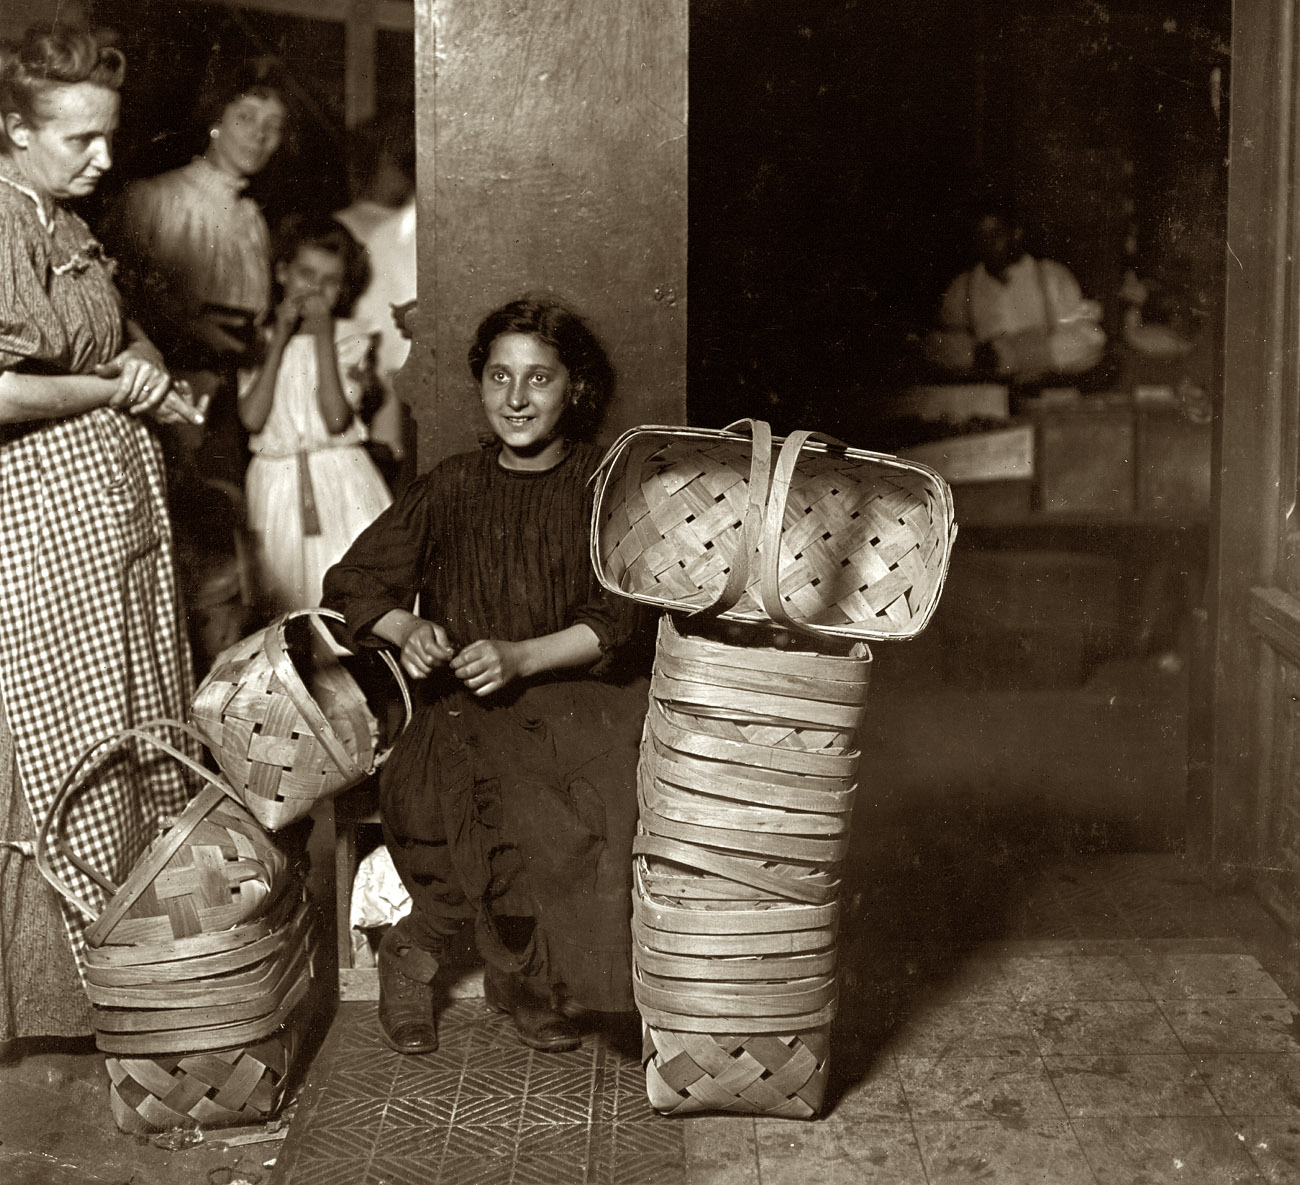 August 1908, Cincinnati. "Lena Lochiavo, 11 years old, Basket Seller, Sixth Street Market. Saloon entrance. 11 p.m. Had been there since 10 a.m. and not yet sold out." Photograph and caption by Lewis Wickes Hine. View full size.